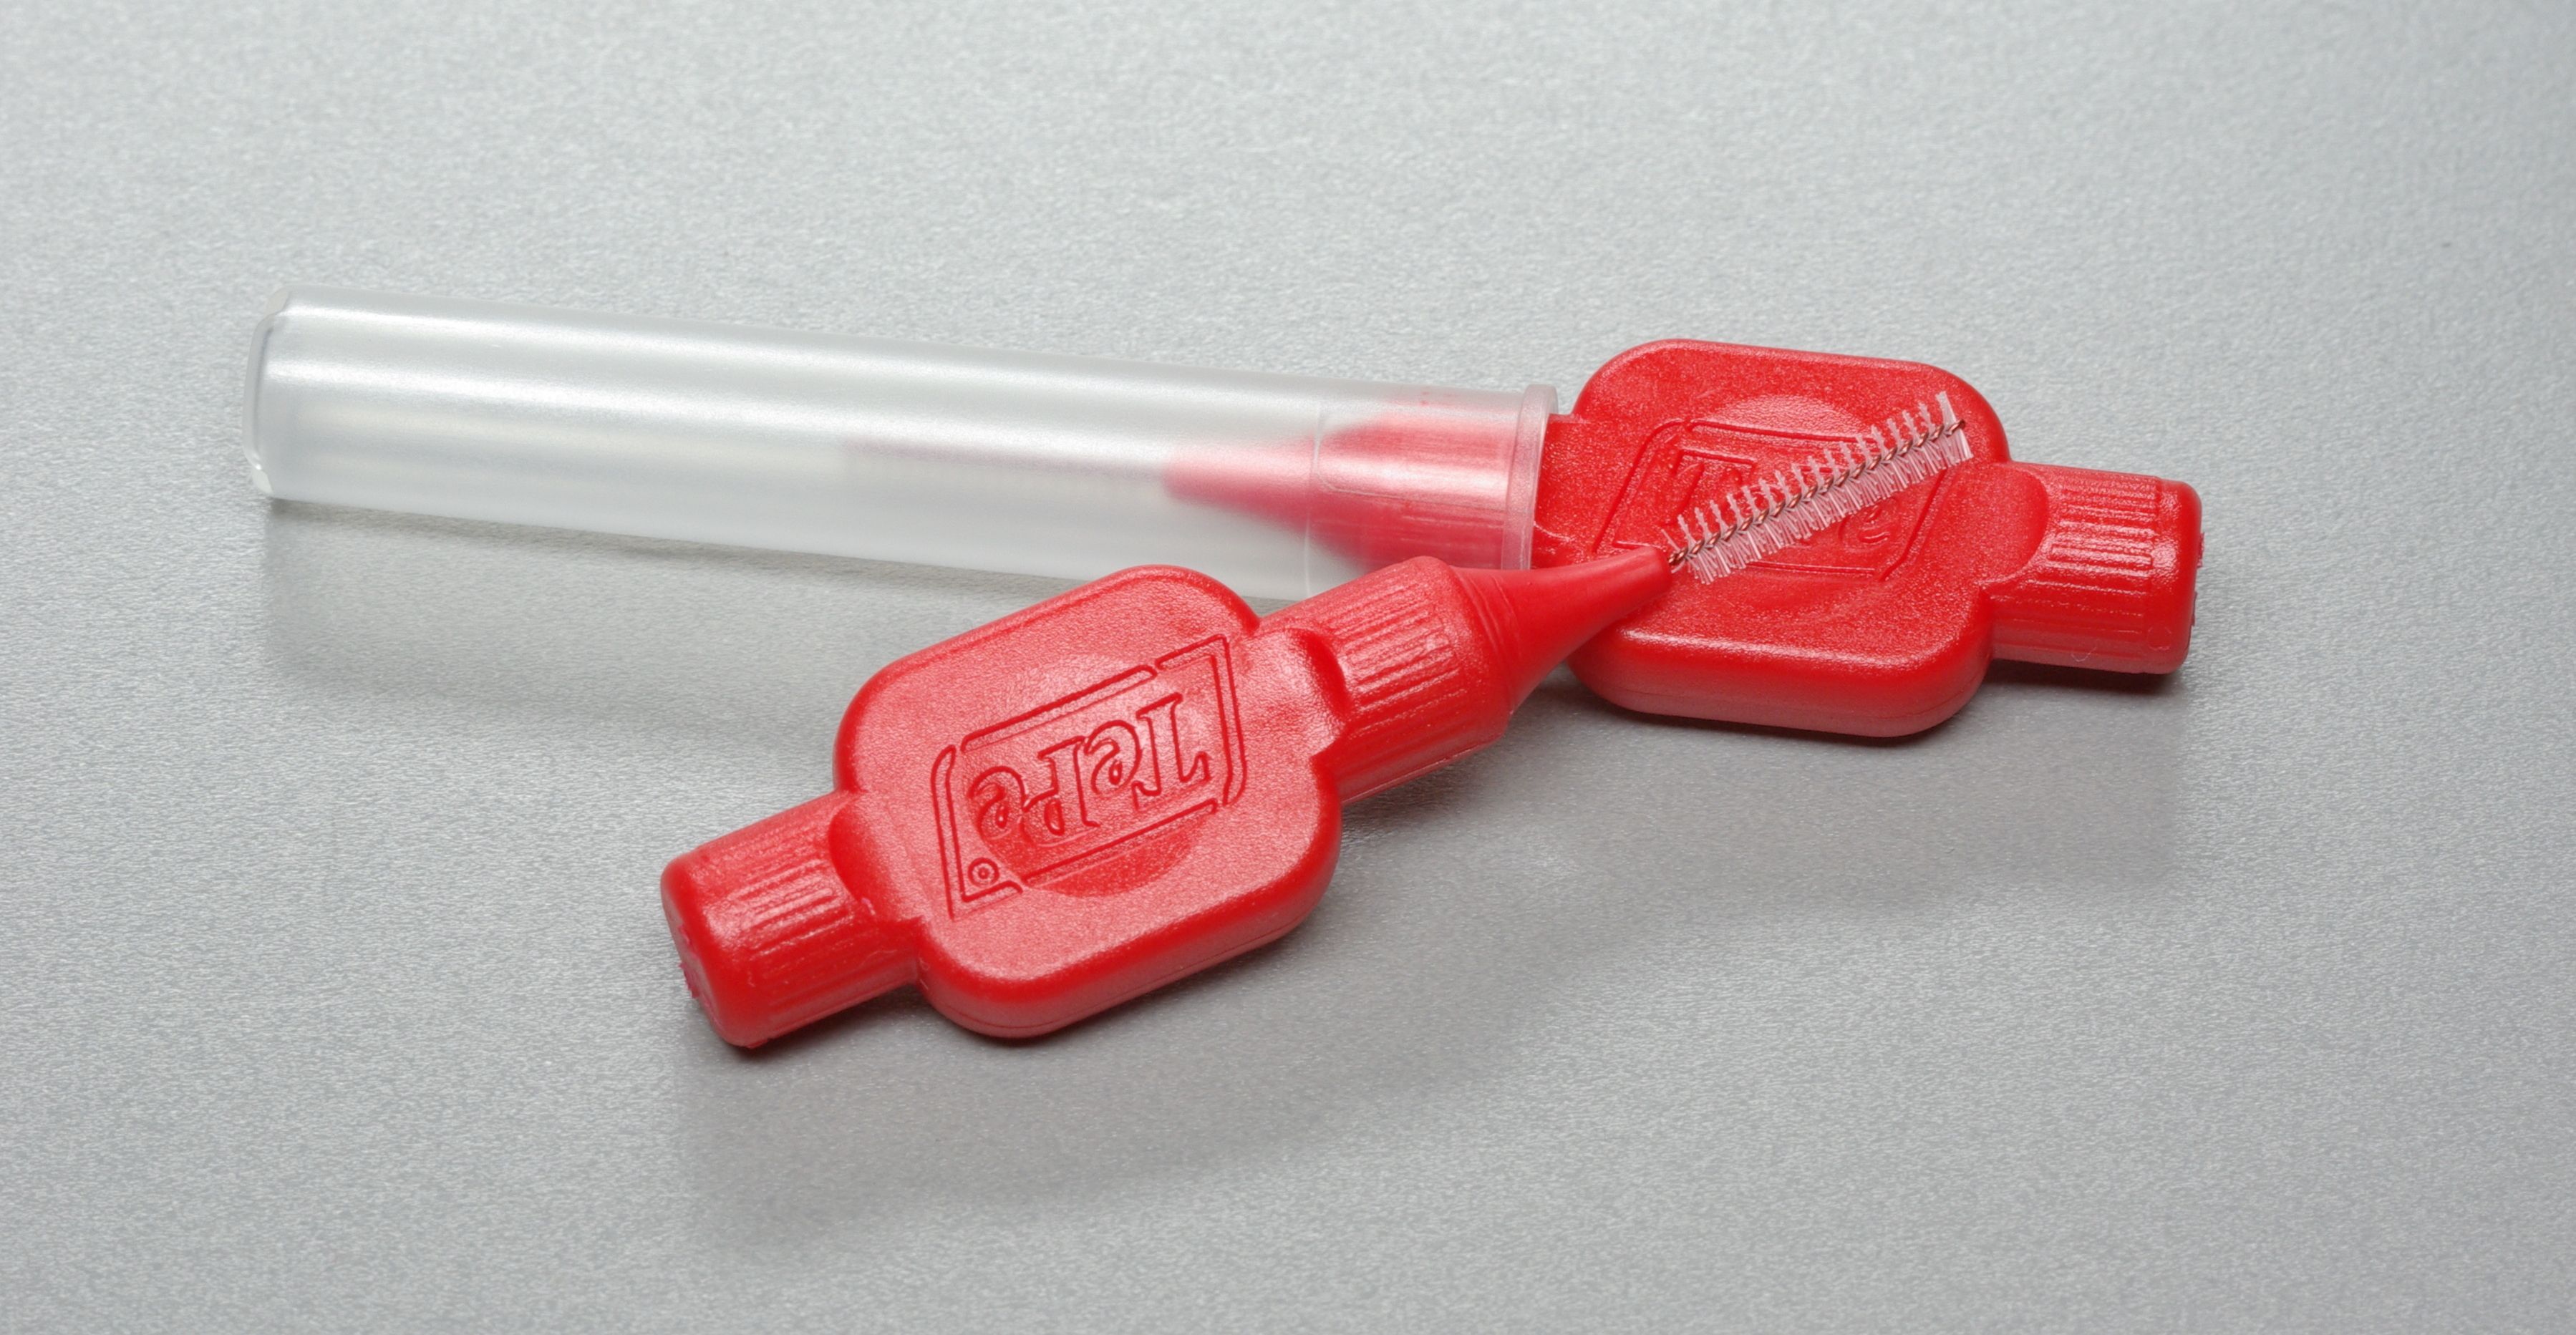 pair of red interdental brushes